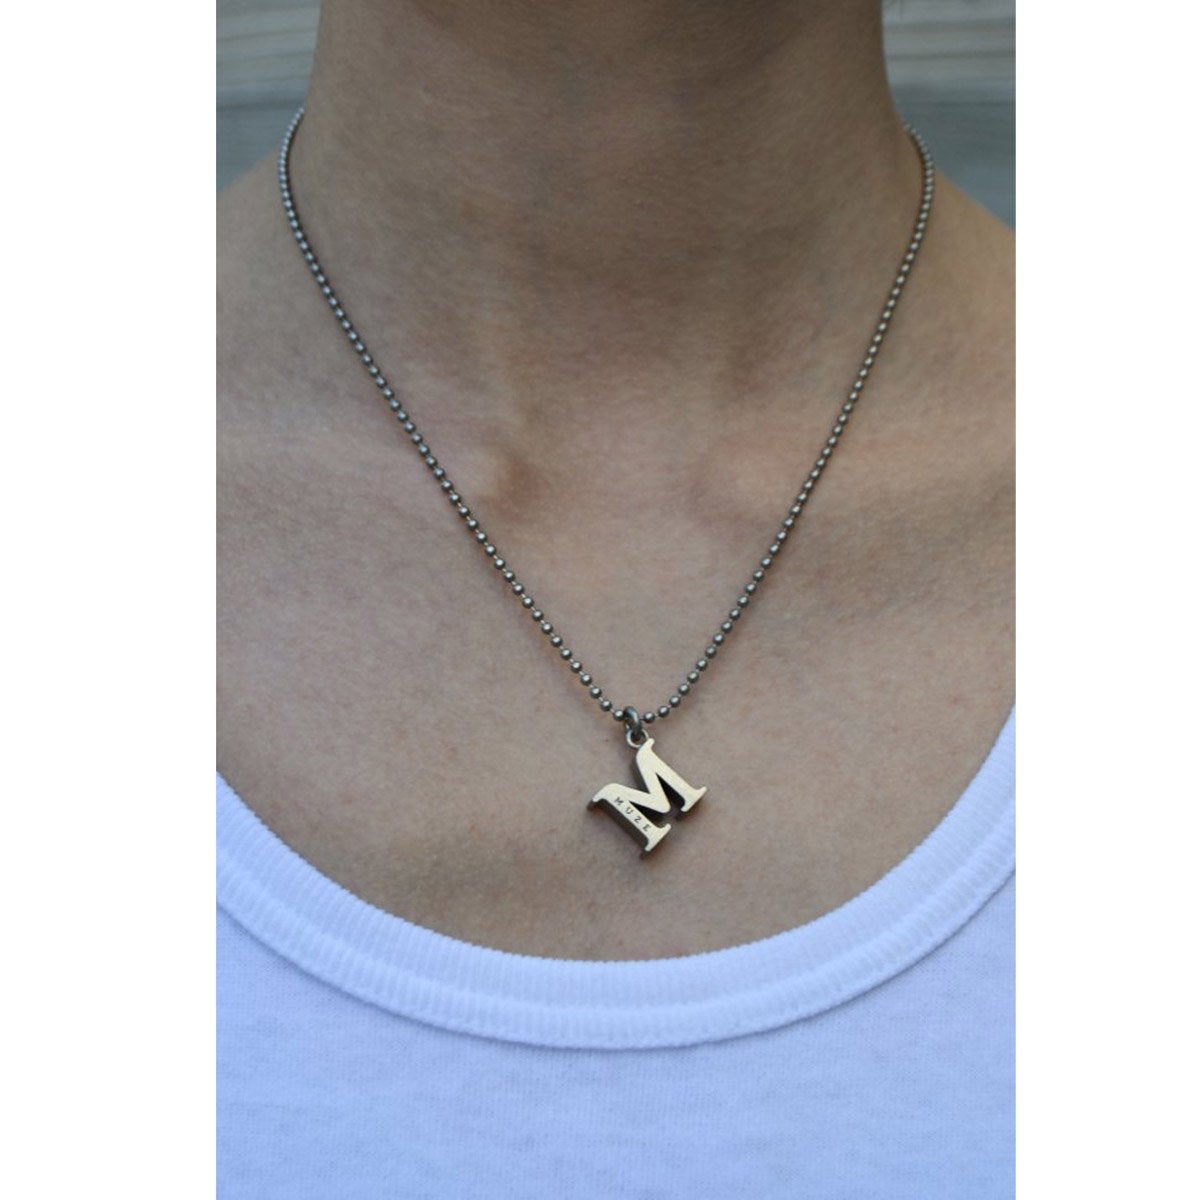 MUZE - M LOGO NECKLACE (MATTE SILVER) ミューズ ロゴ ネックレス